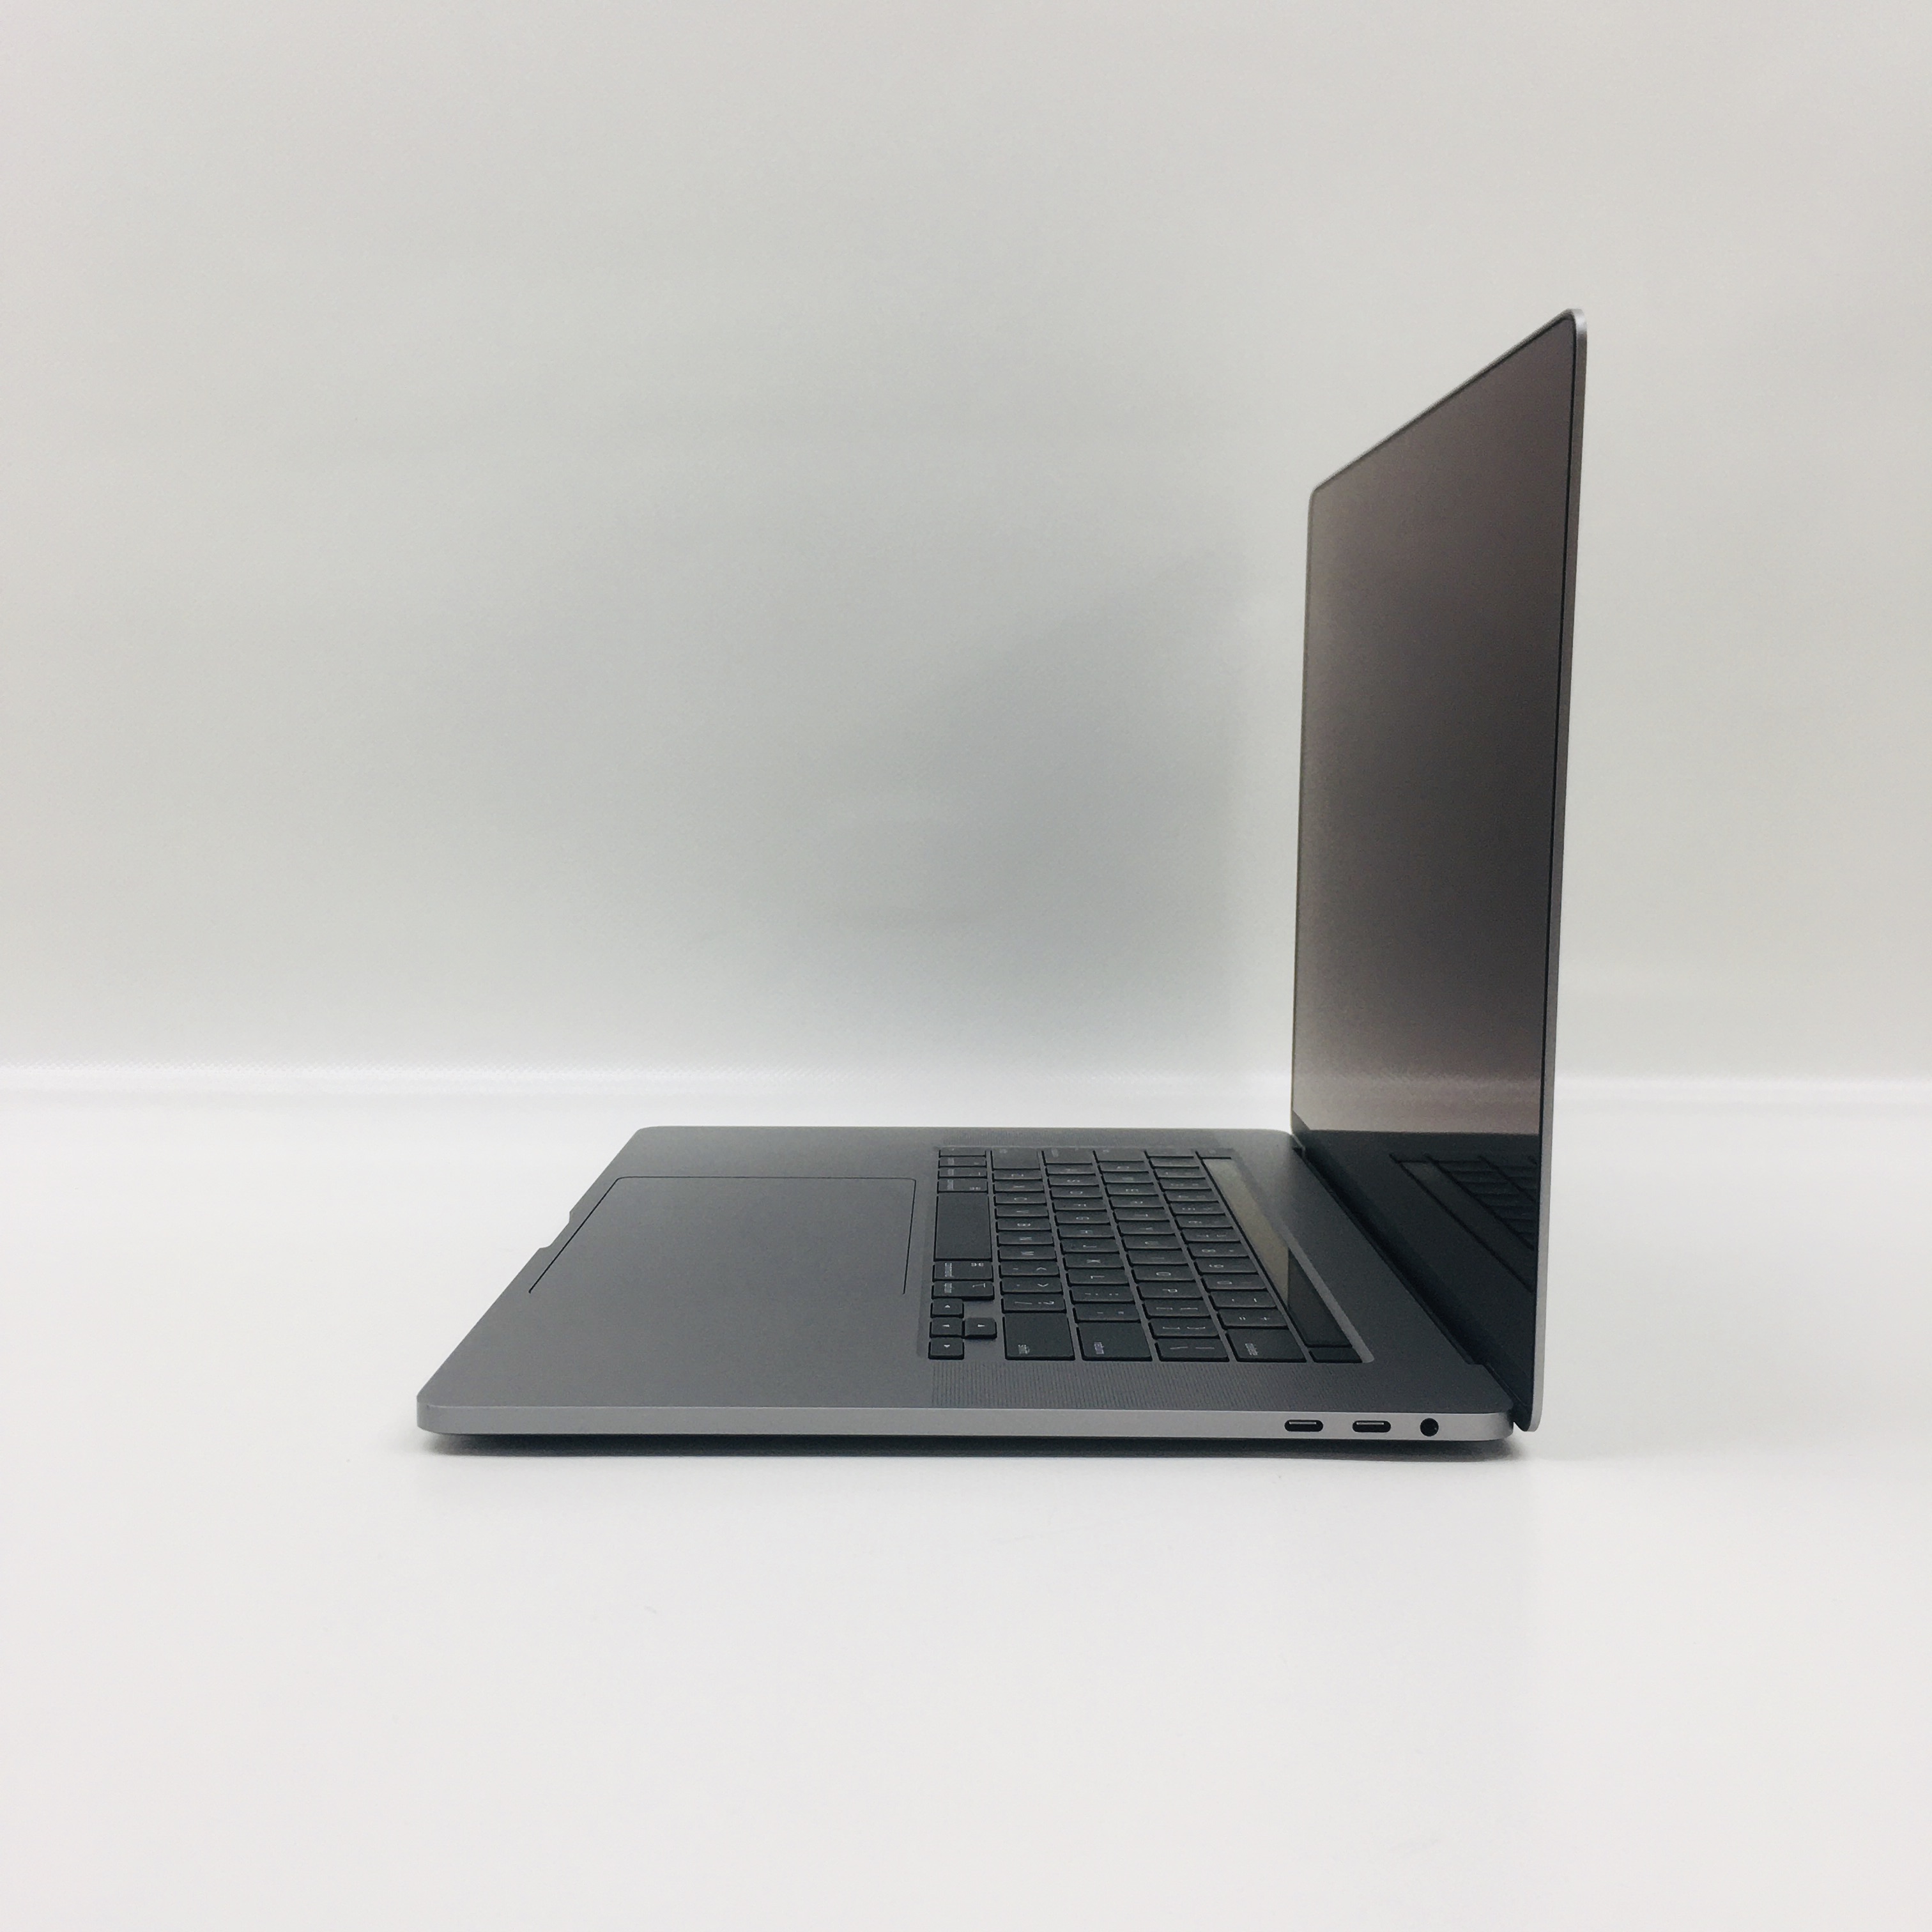 MacBook Pro 16" Touch Bar Late 2019 (Intel 6-Core i7 2.6 GHz 32 GB RAM 512 GB SSD), Space Gray, Intel 6-Core i7 2.6 GHz, 32 GB RAM, 512 GB SSD, image 3